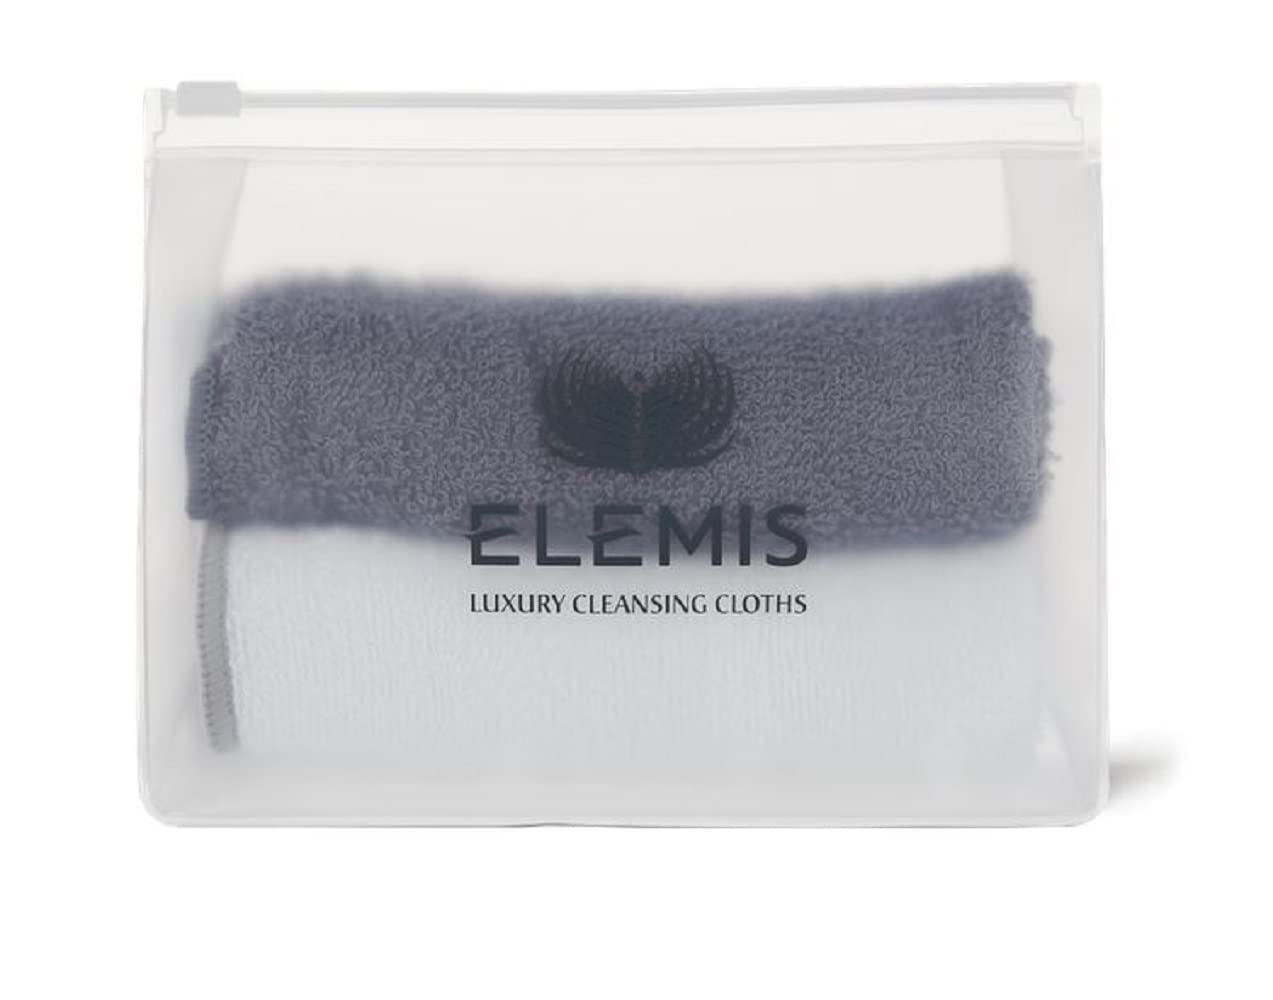 ELEMIS Luxury Cleansing Cloth Duo, Soft Pure Cotton Facial Cloths, Ideal For Removing Cleansers, Exfoliators and Masks, Gently Cleanses and Opens Pores, Pack of 2